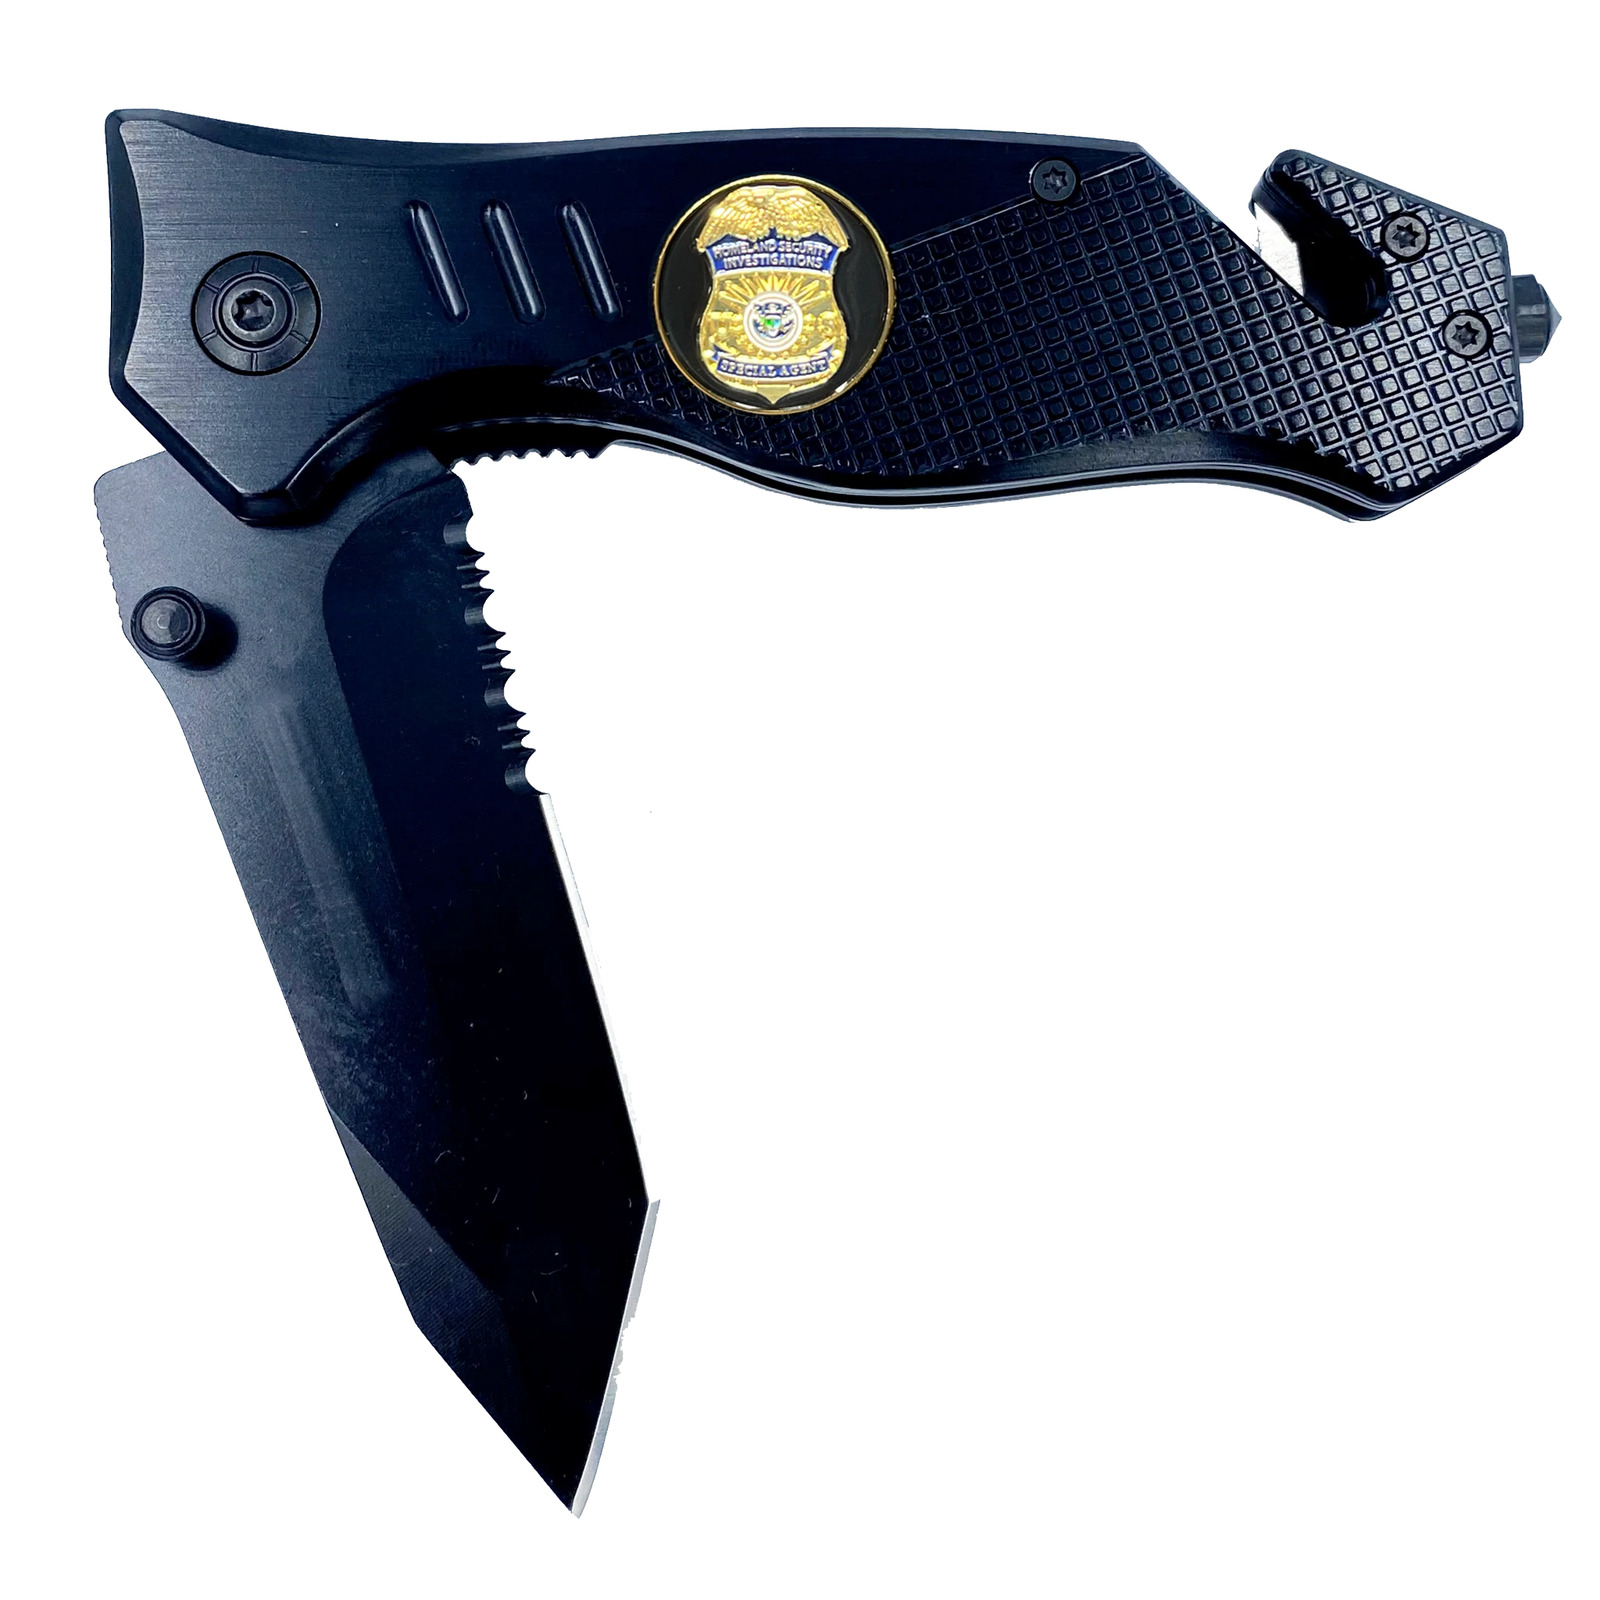 HSI Special Agent collectible 3-in-1 Police Tactical Rescue knife tool with Seat